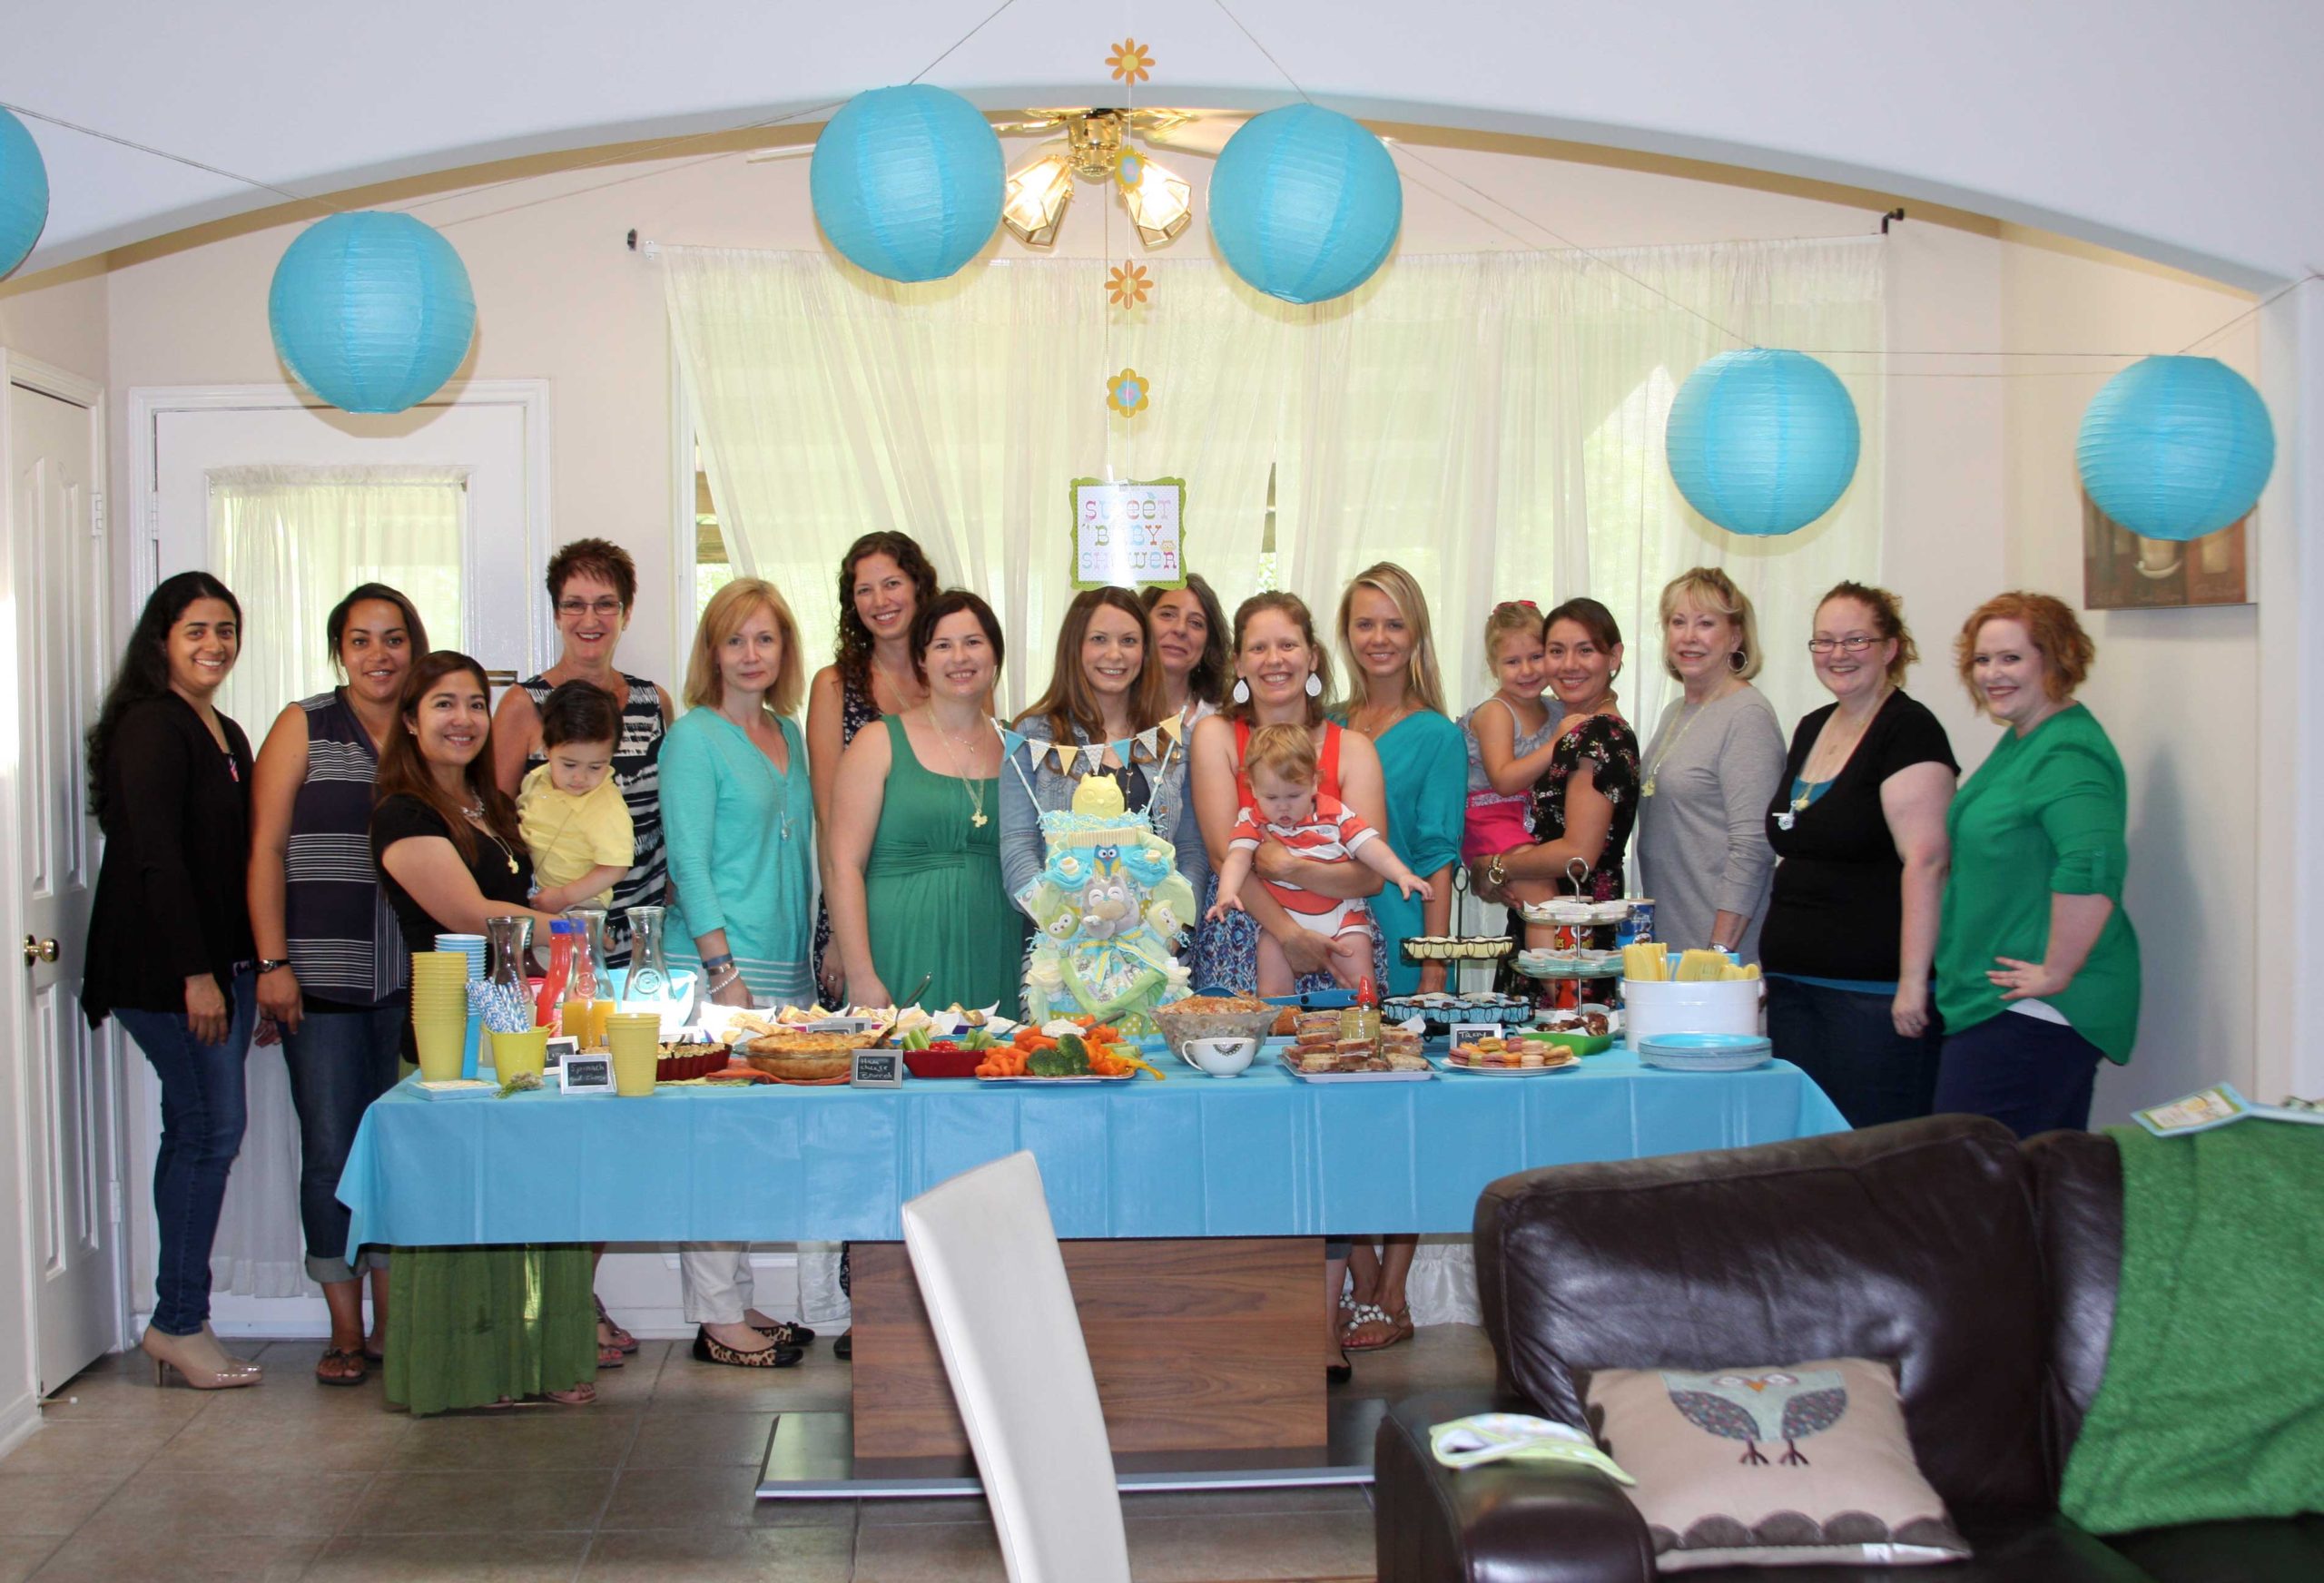 Joanne's turquoise and yellow, 'Owl' Baby Shower